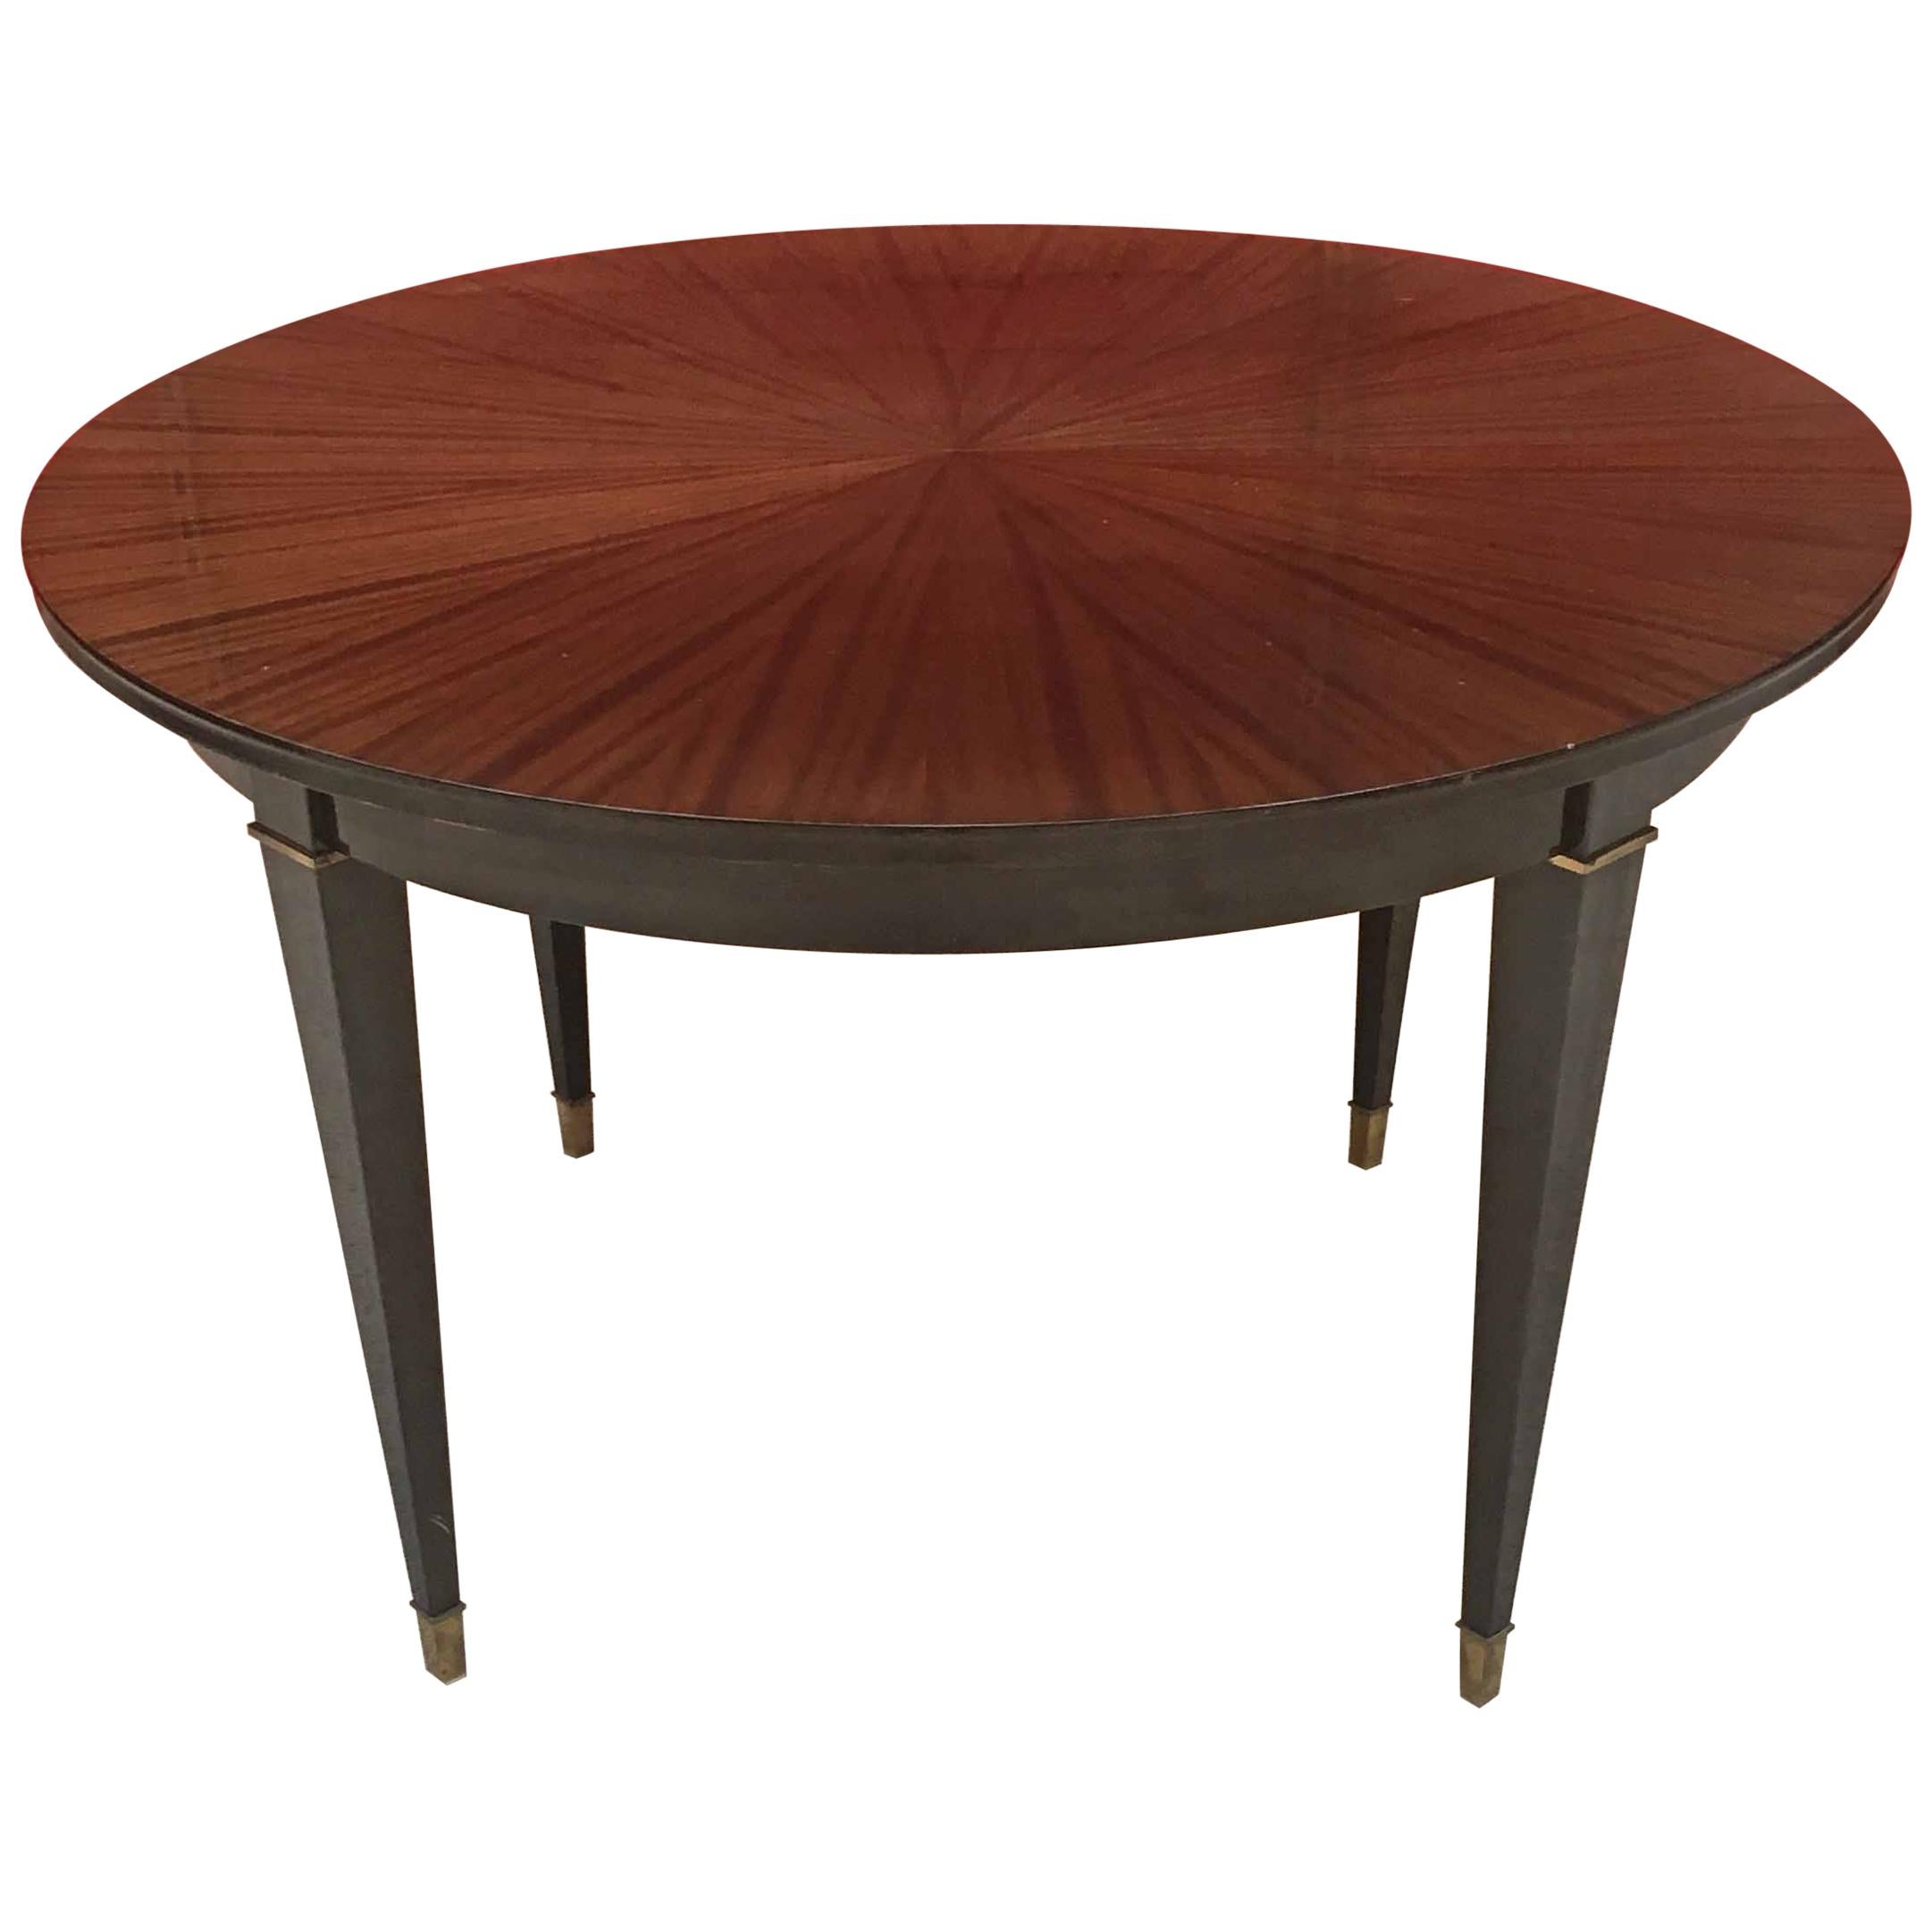 Neoclassical Art Deco Table in Mahogany circa 1950 the Varnish is Insolarized For Sale